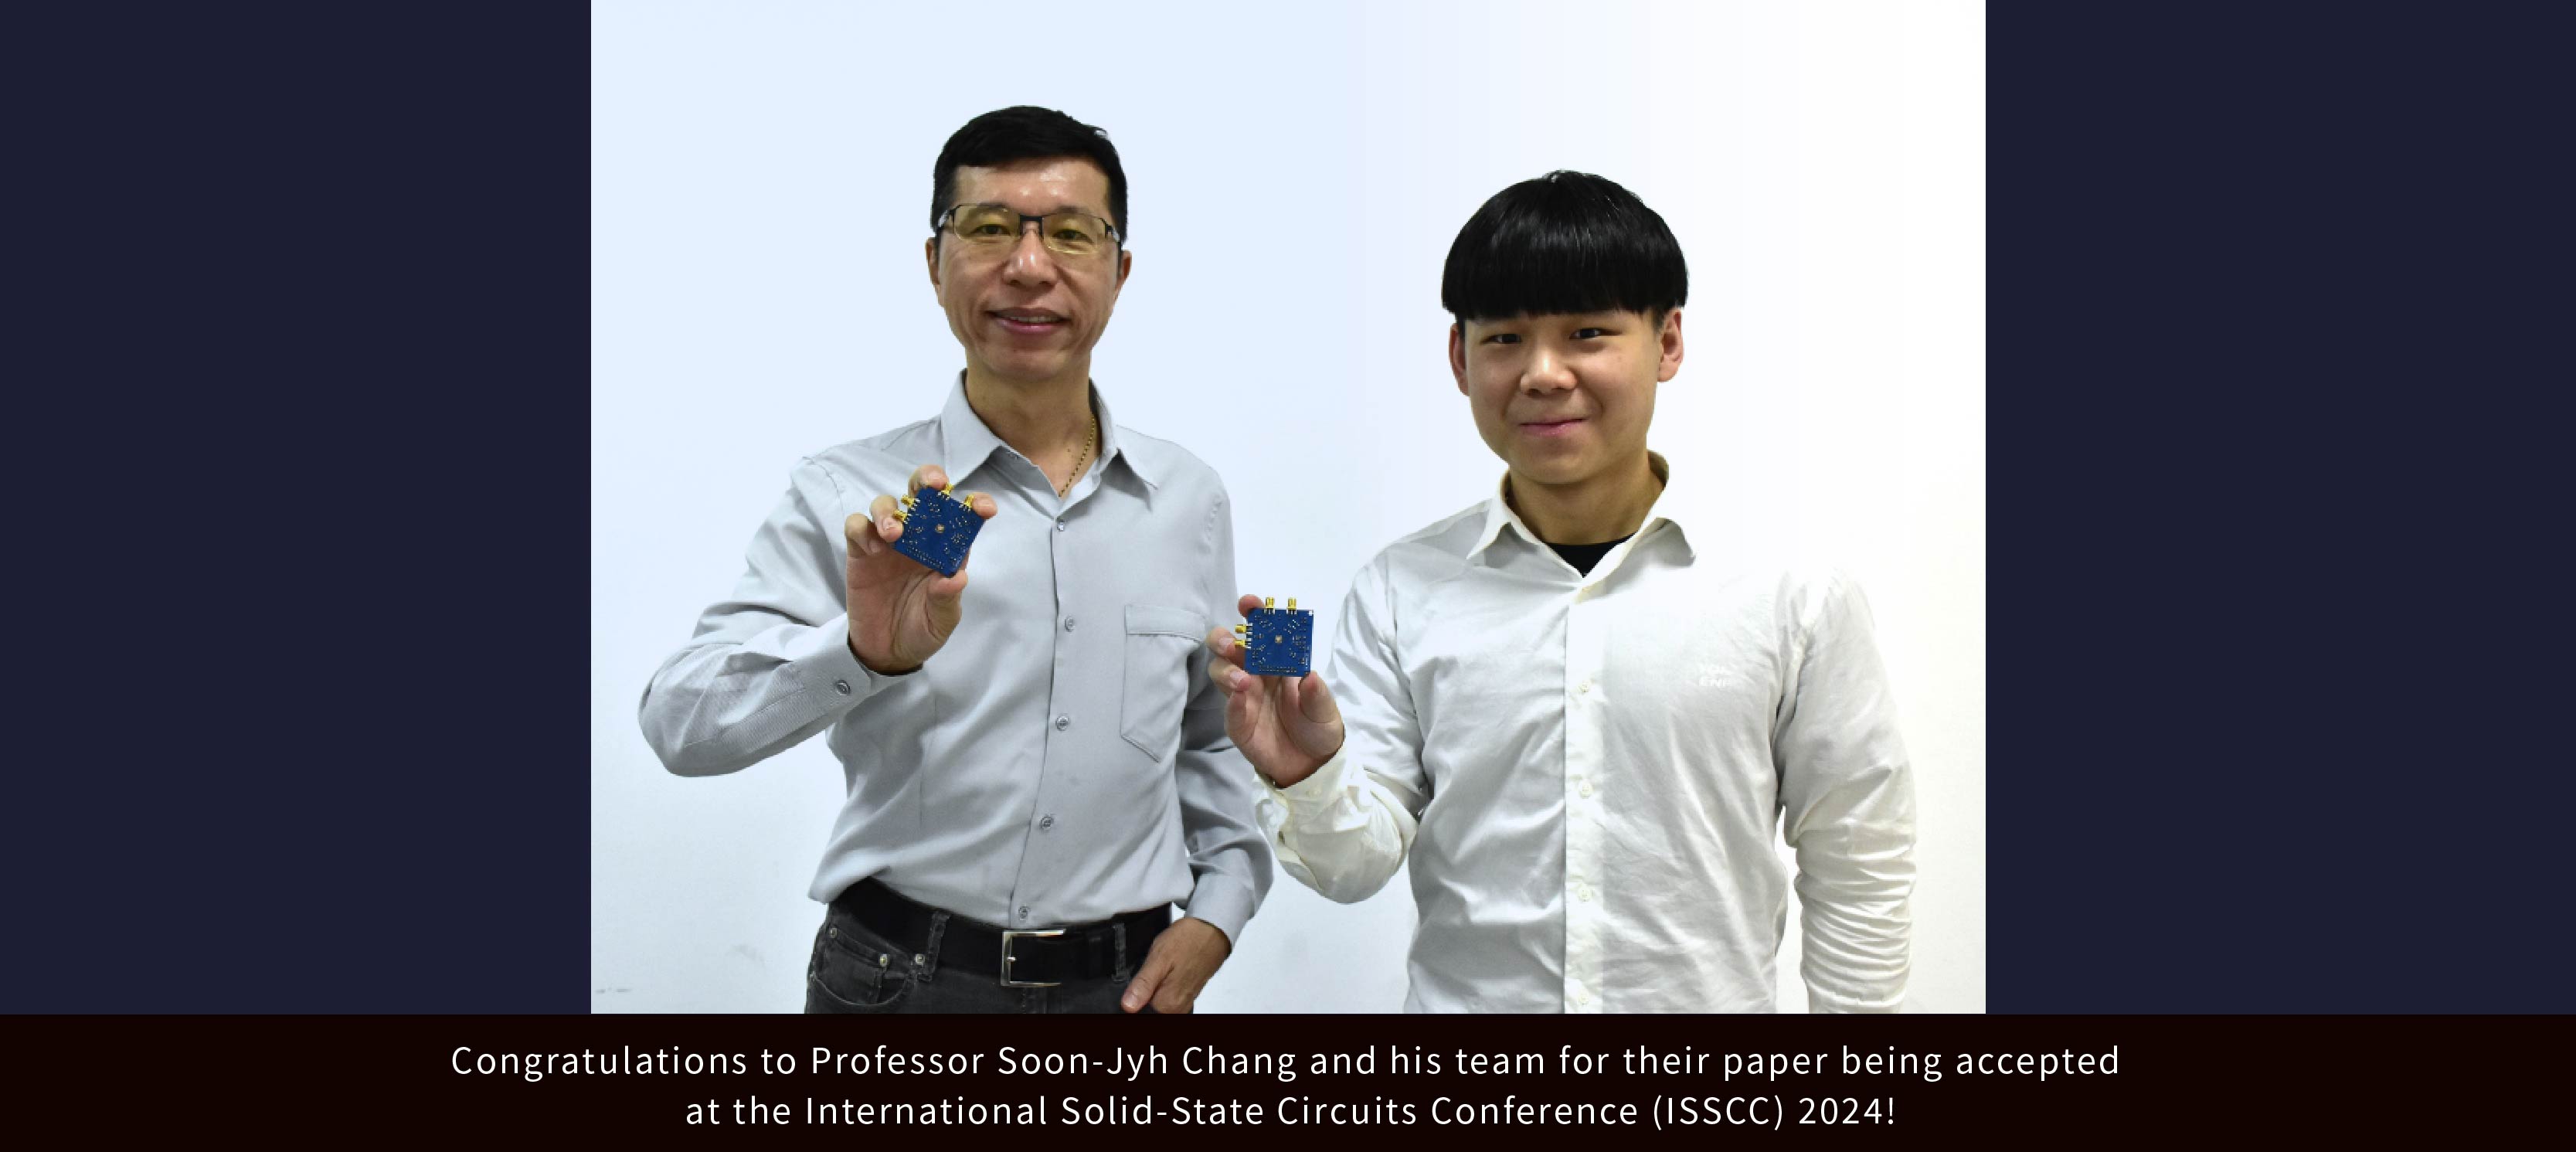 Congratulations to Professor Soon-Jyh Chang and his team for their paper being accepted at the International Solid-State Circuits Conference (ISSCC) 2024!